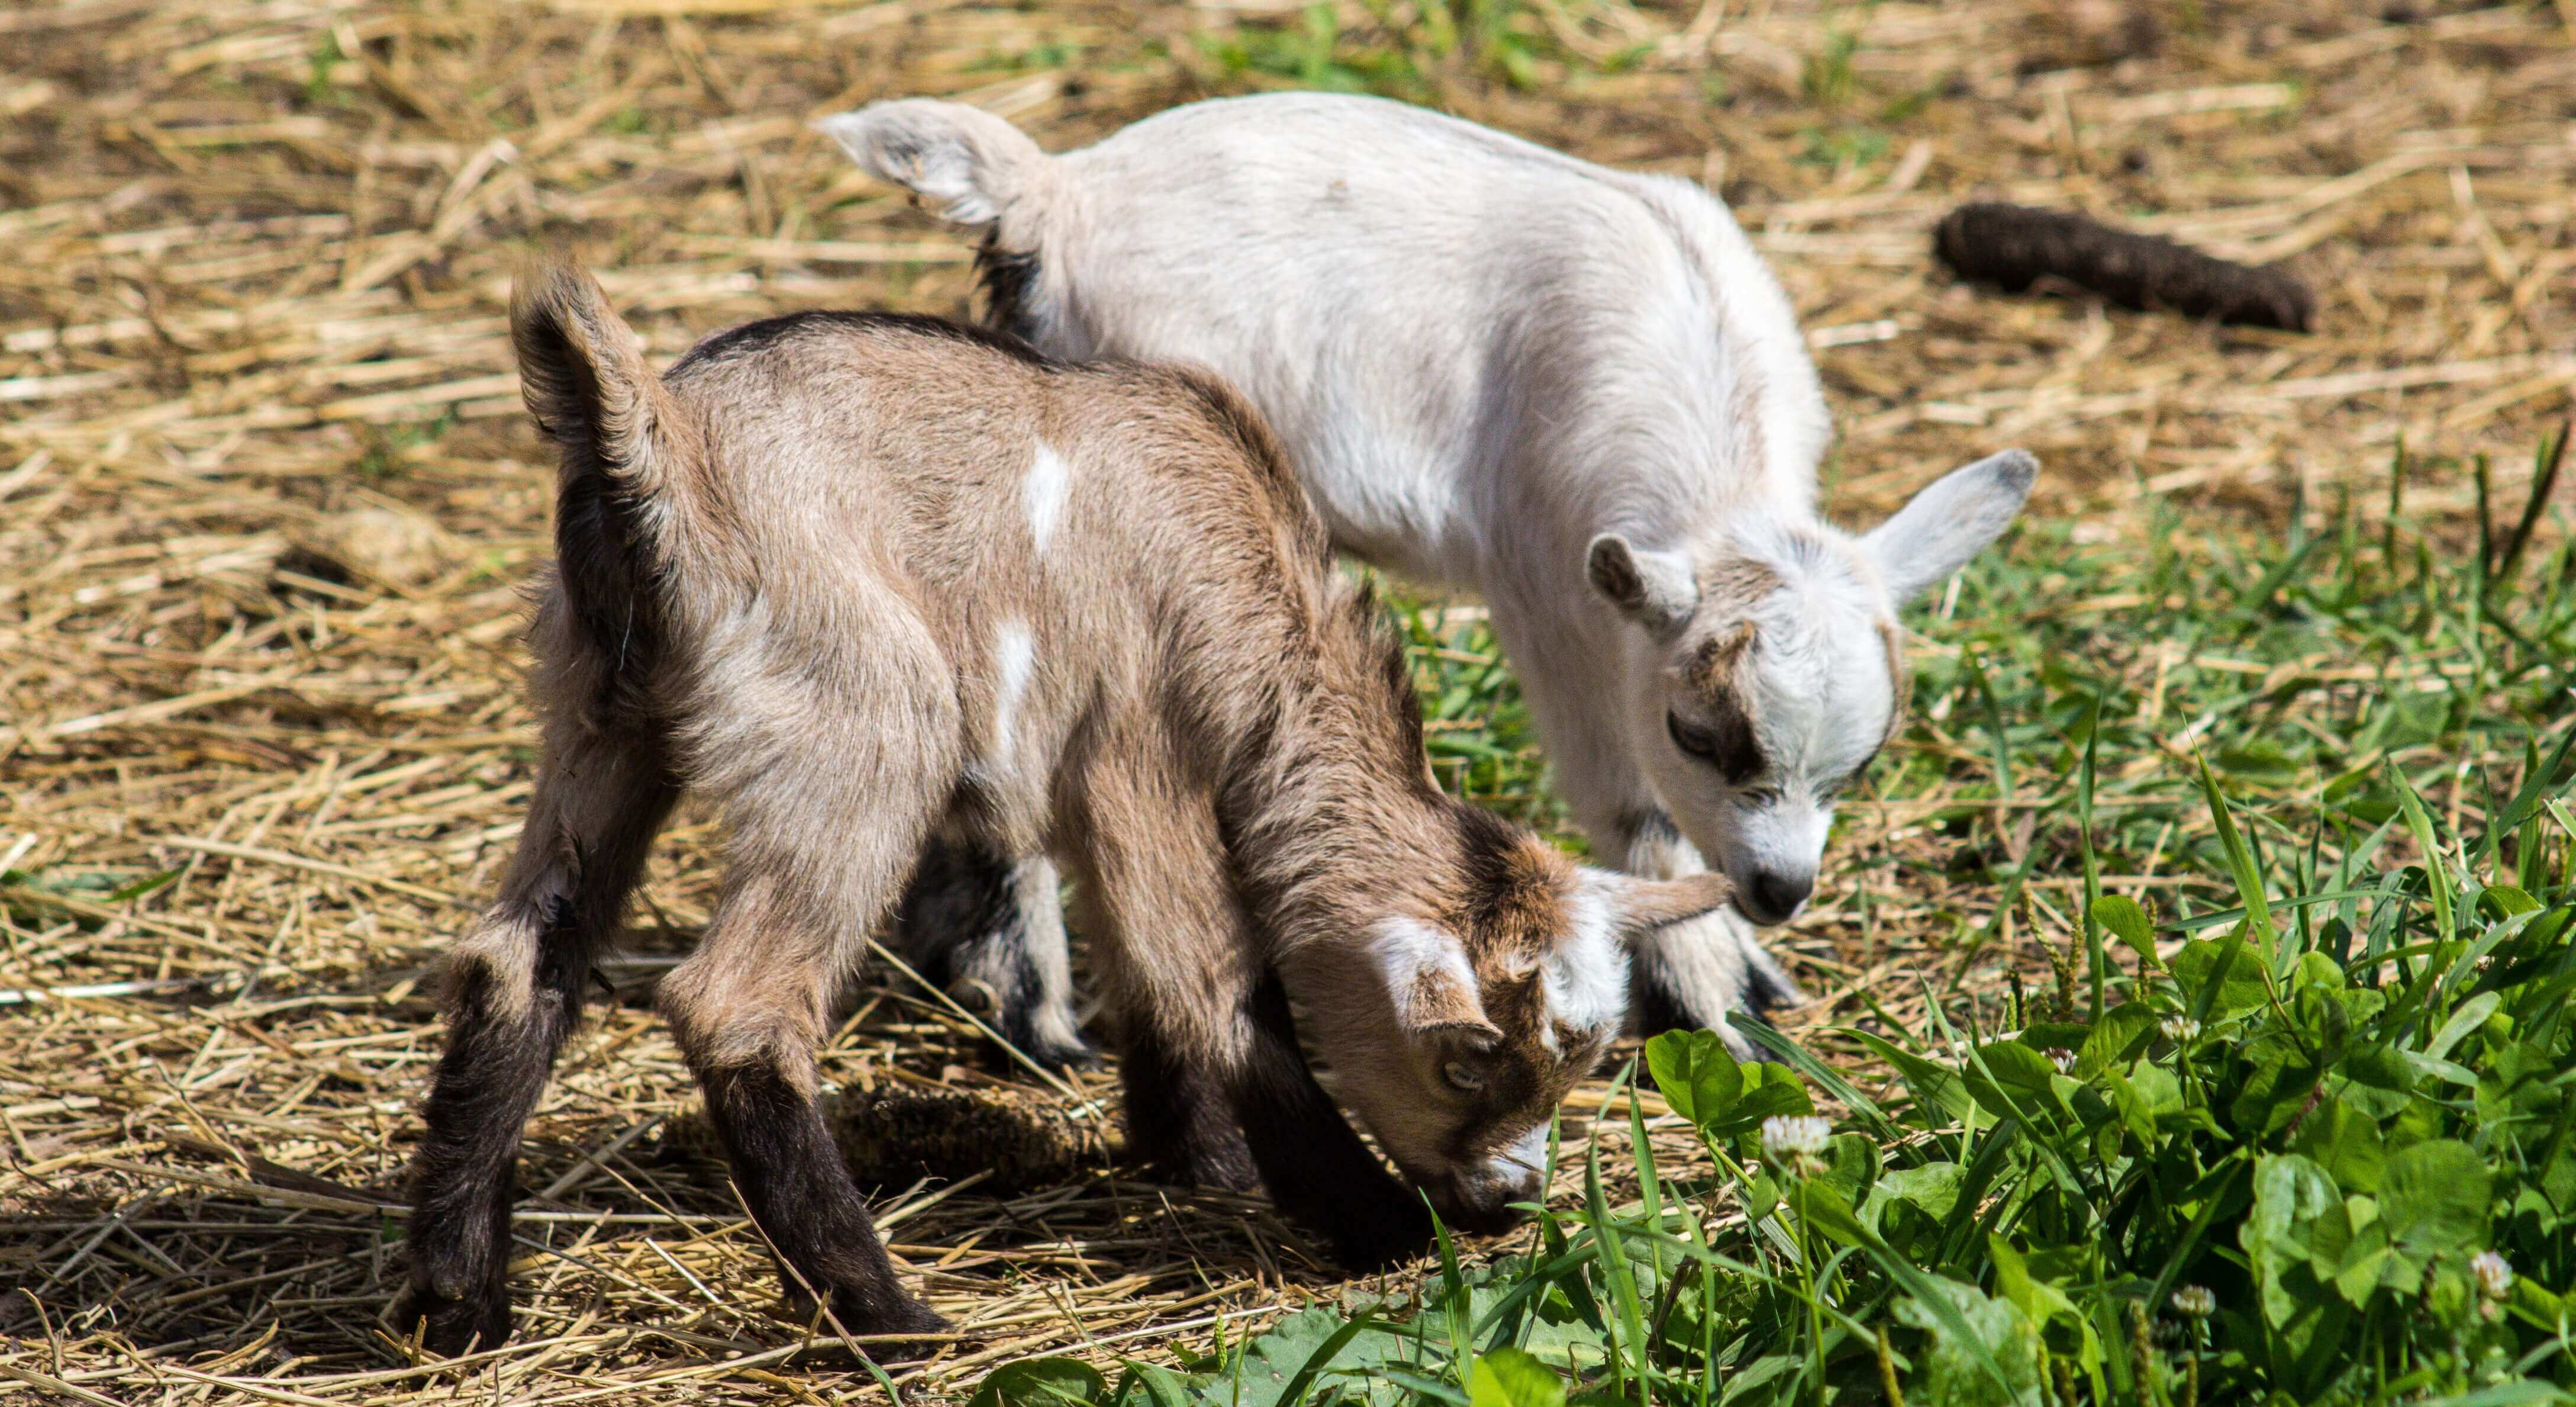 How To Raise Goats: Full Guide For Beginners